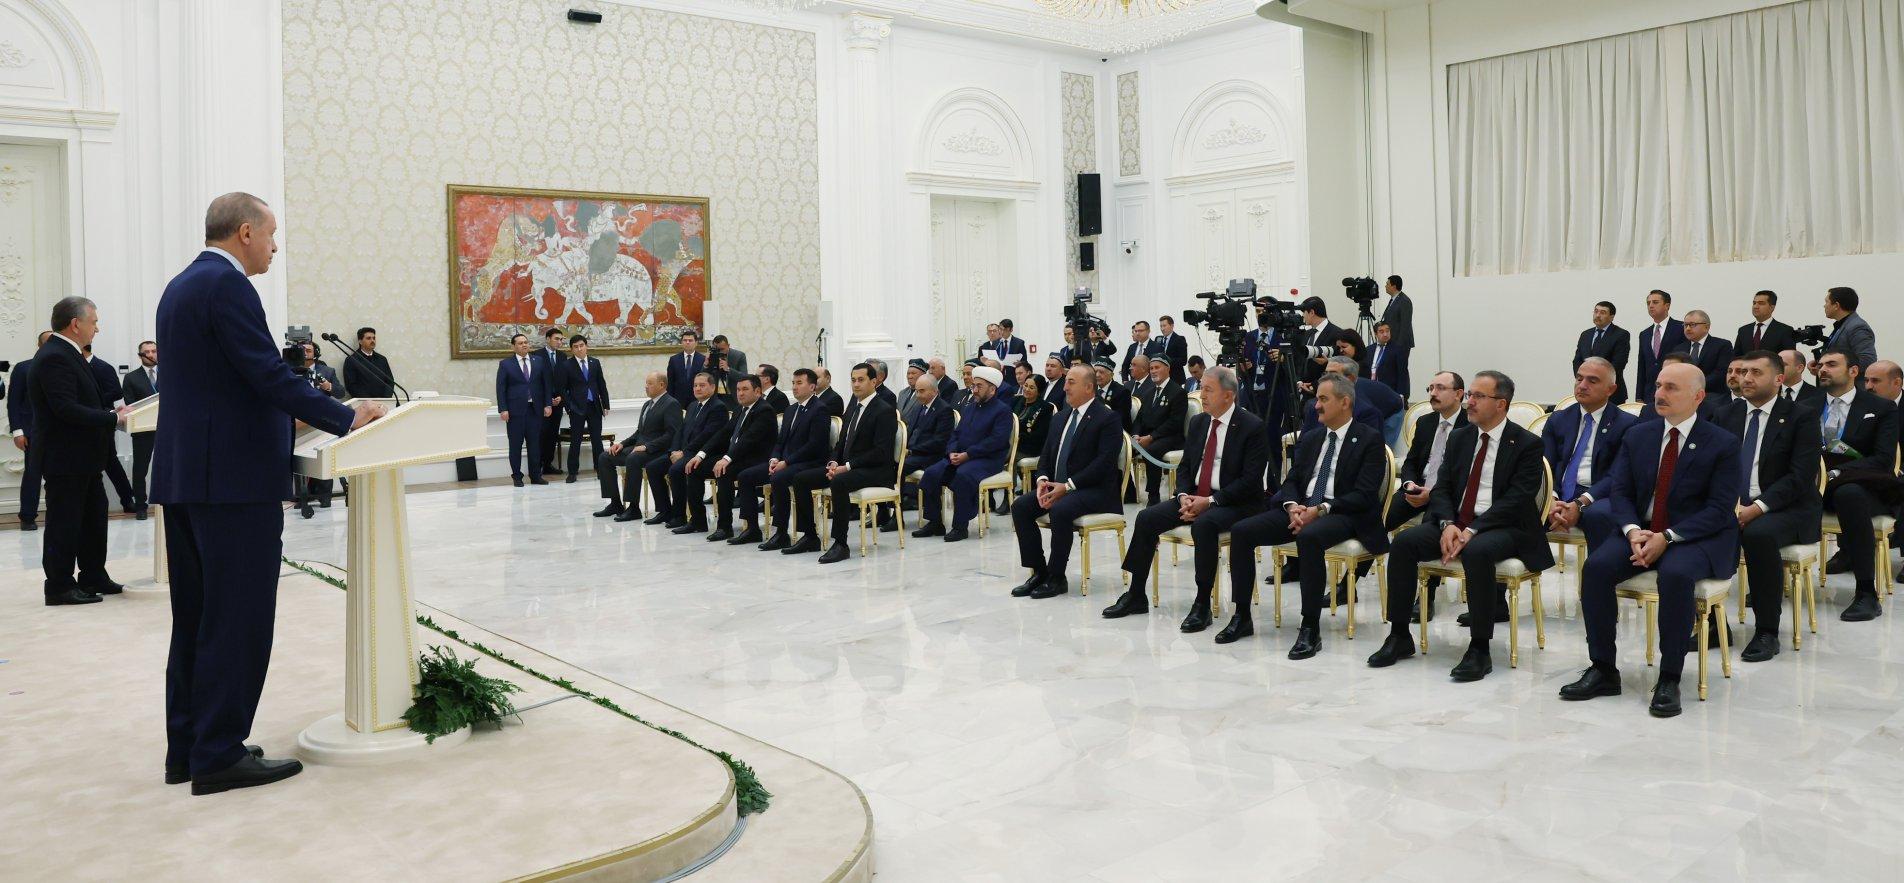 MINISTER ÖZER IS IN UZBEKISTAN FOR 9th SUMMIT OF THE ORGANIZATION OF TURKIC STATES